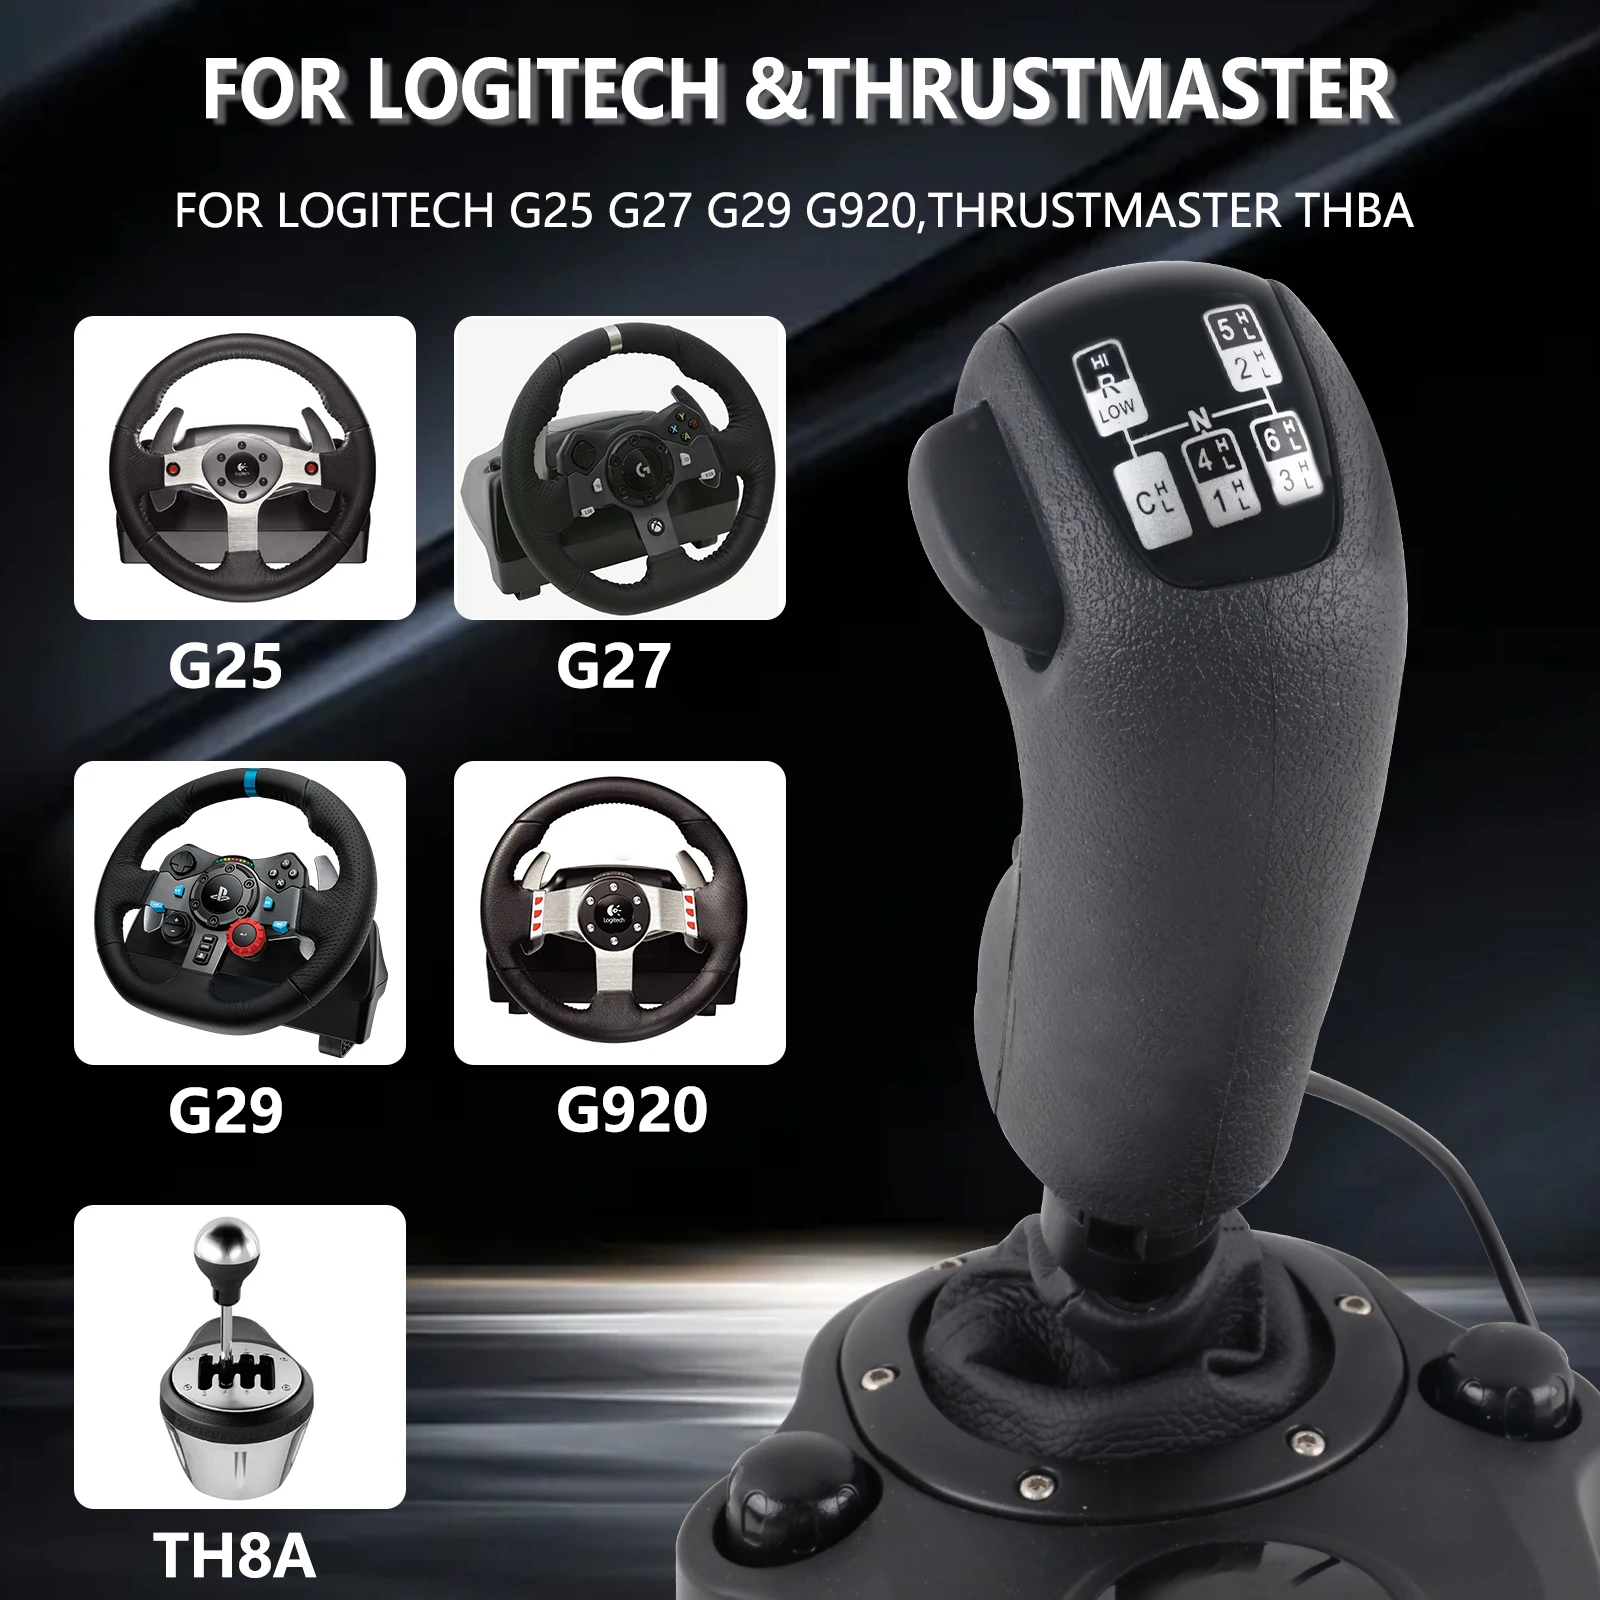 Scania Truck Gear Simulator USB Shift Knob for Logitech G923 G29 G27 G25 TH8A for ETS2&ATS High Low Shifter simulators images - 6